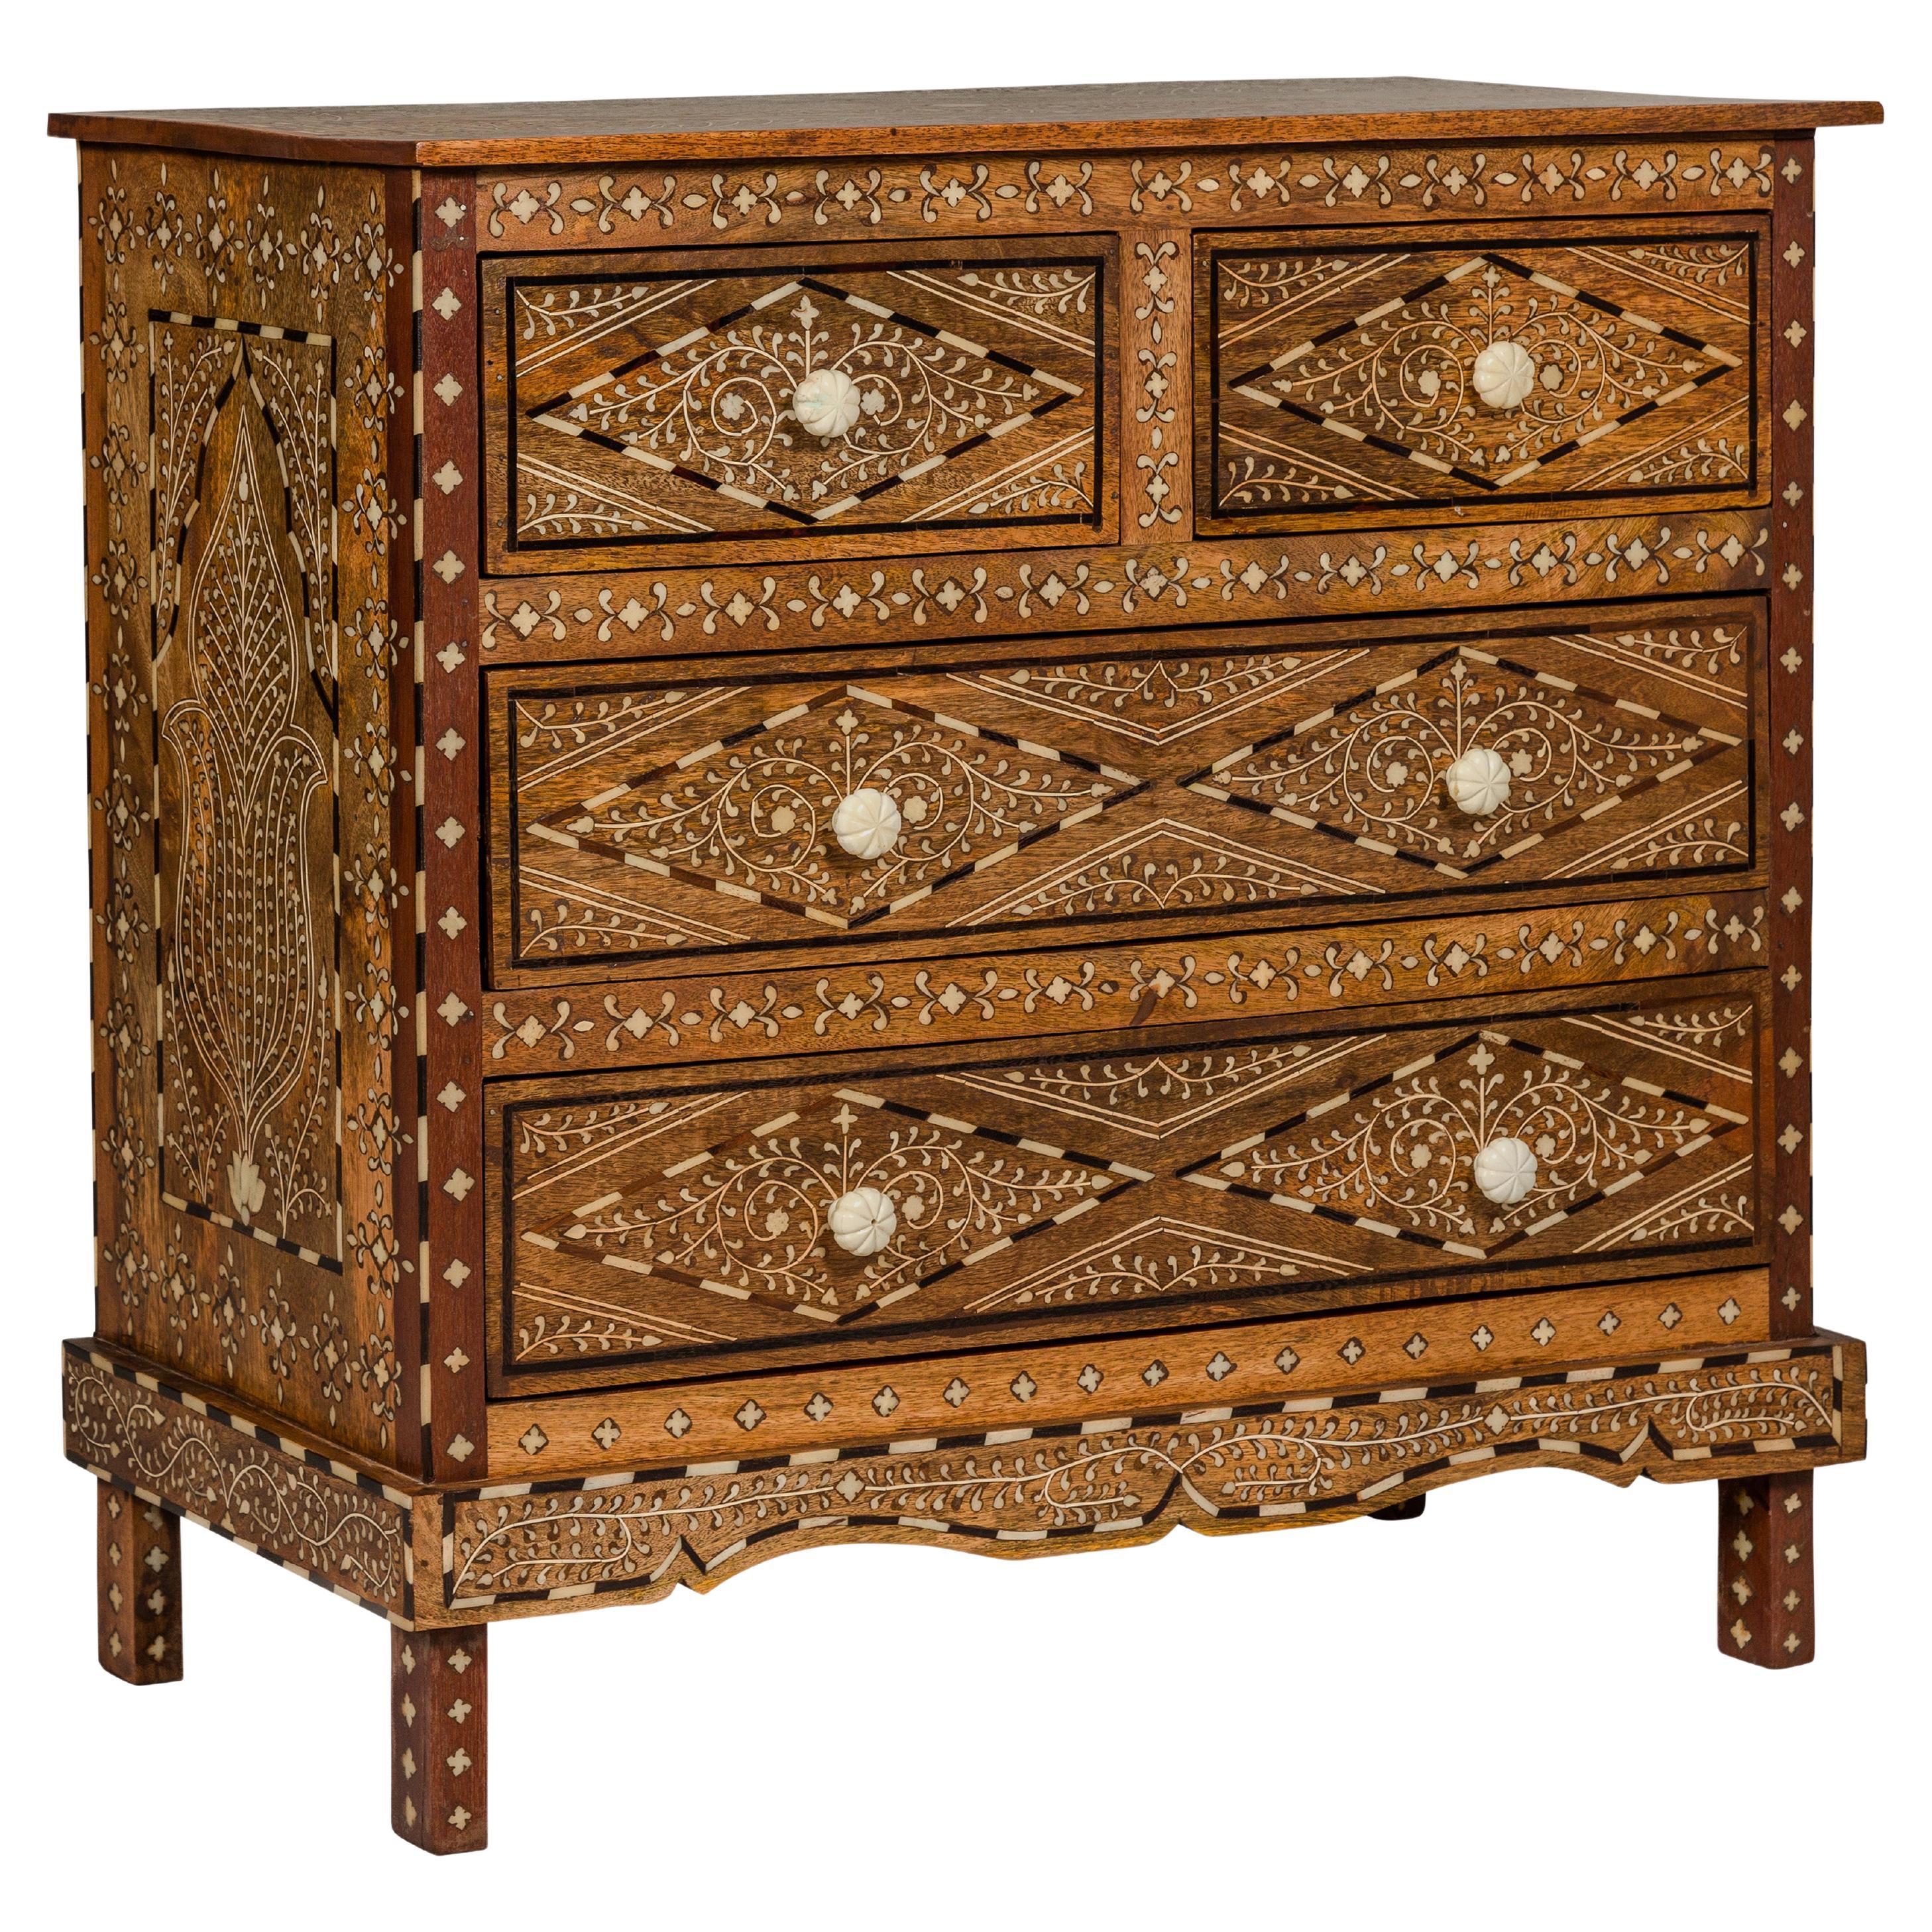 Anglo-Indian Style Mango Wood Four-Drawer Chest with Foliage Bone Inlay